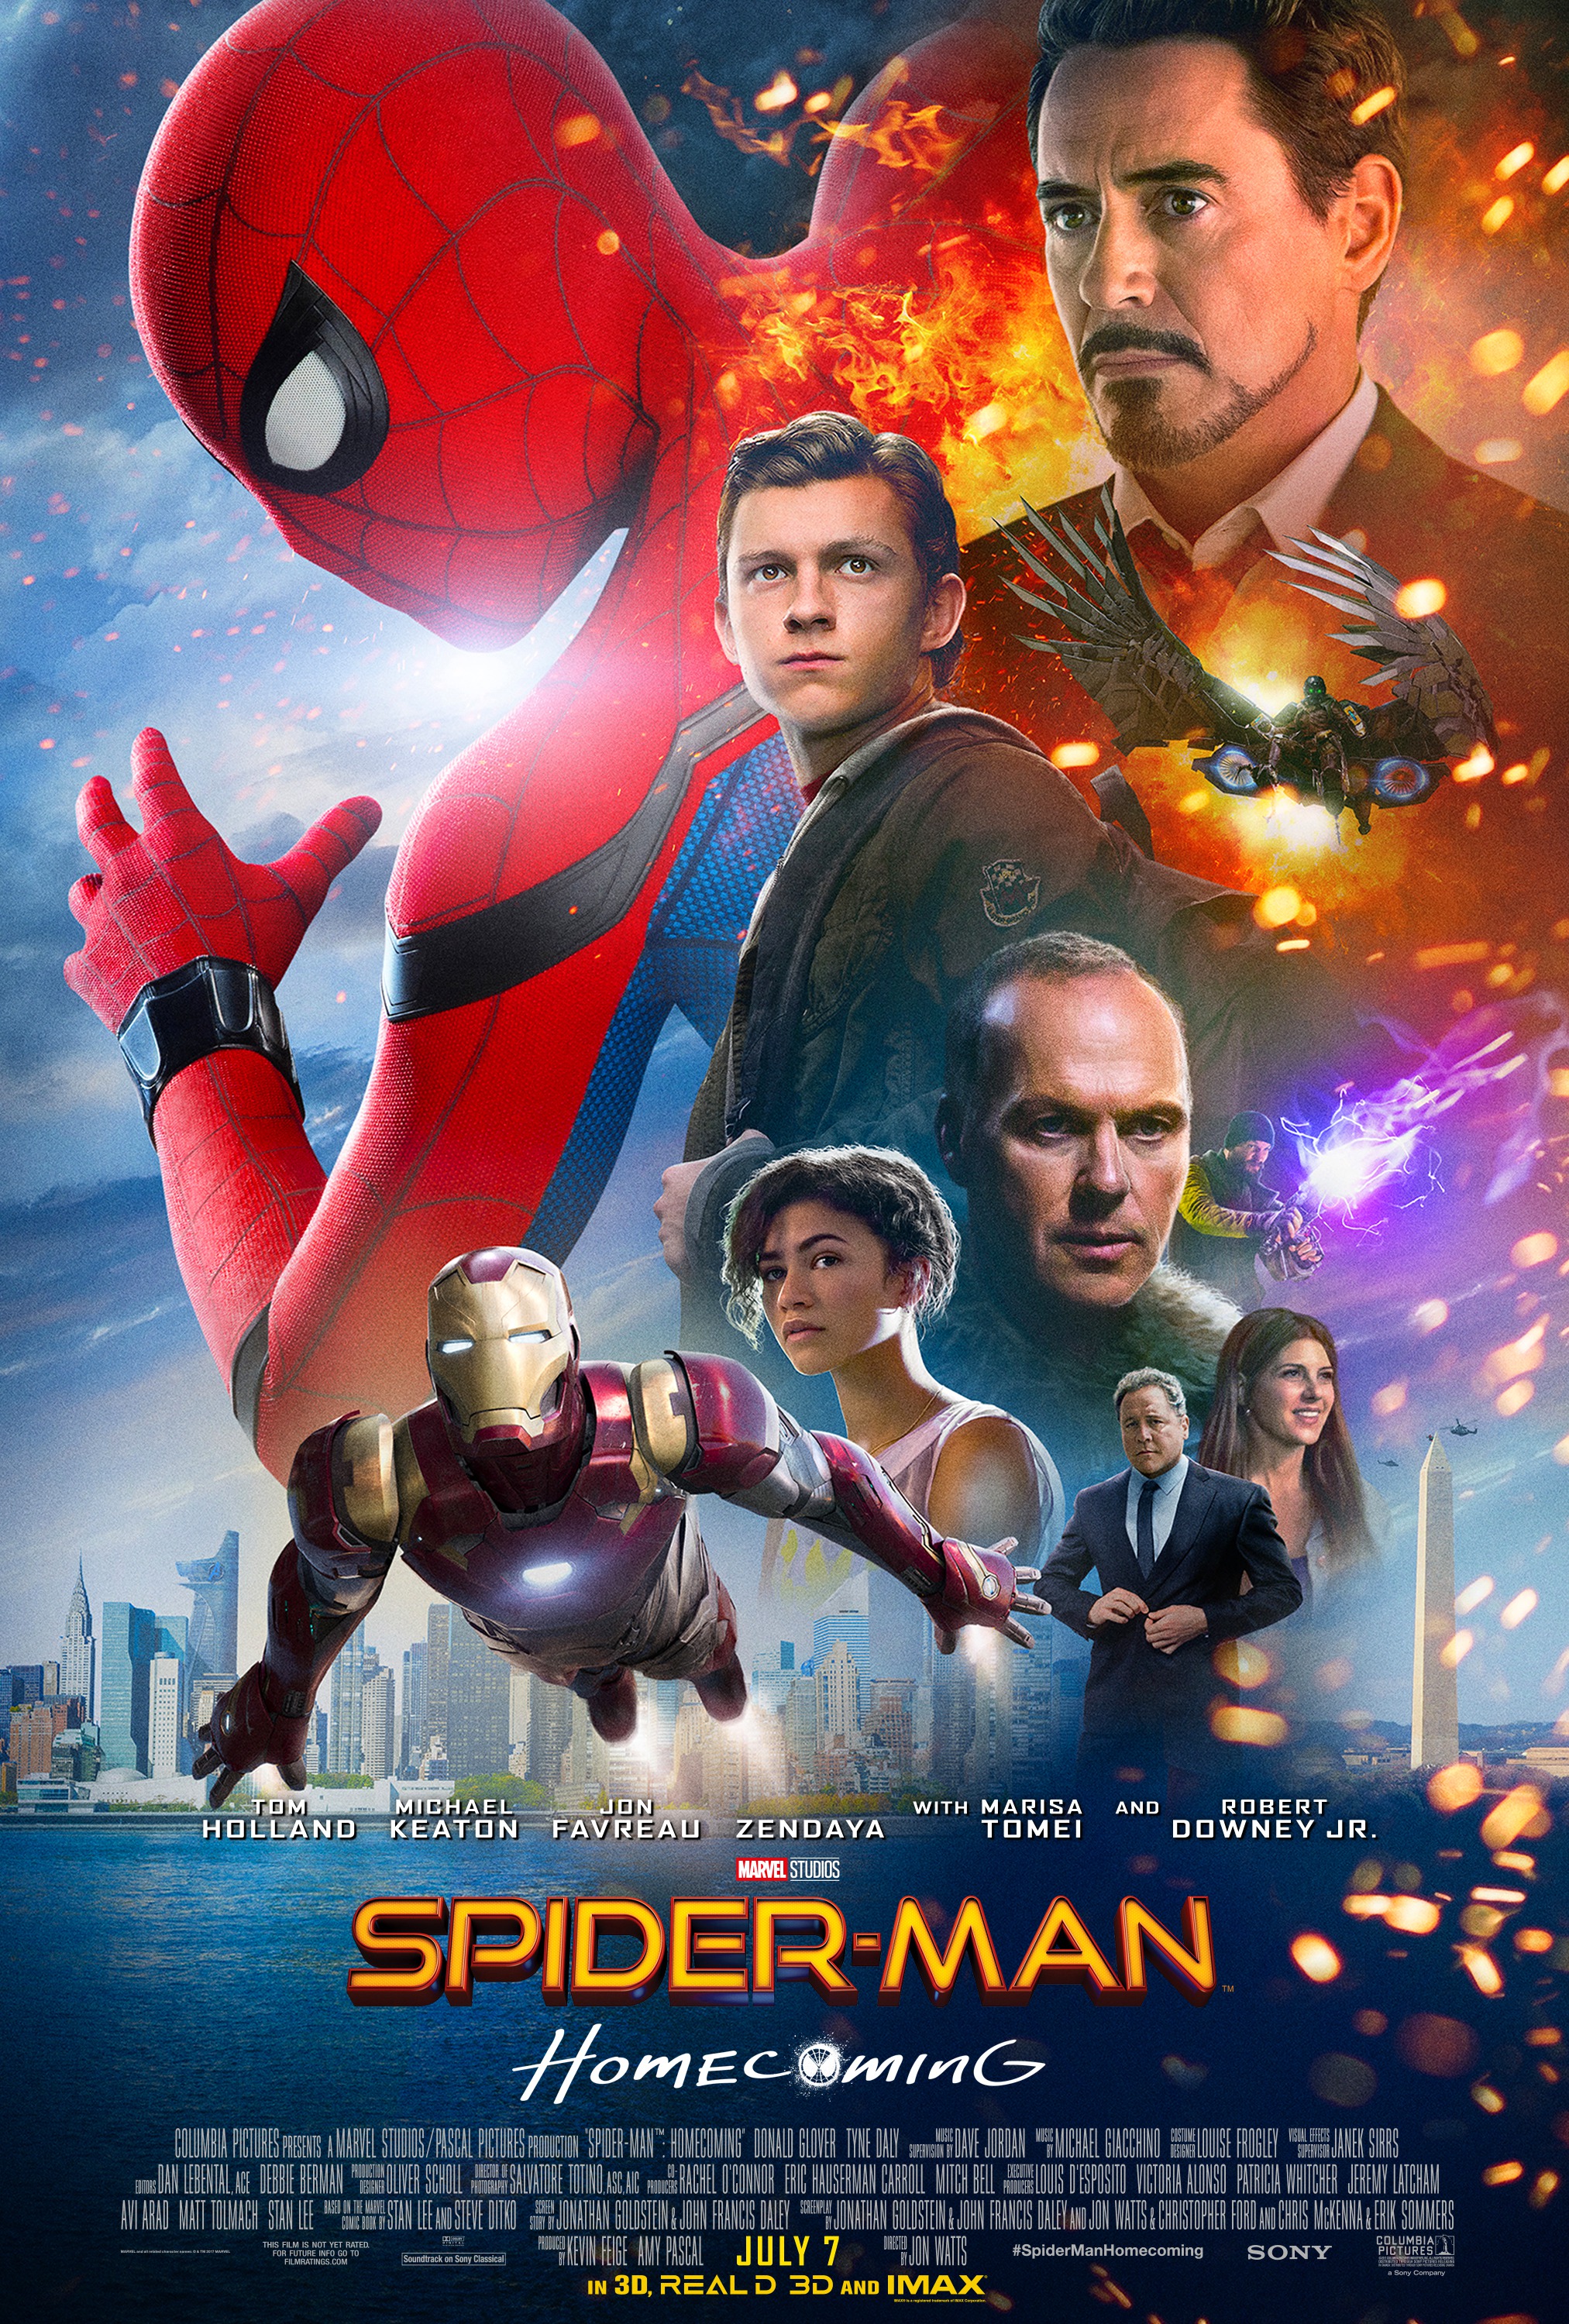 Spider-Man: Homecoming' visual effects: Q&A - CNET